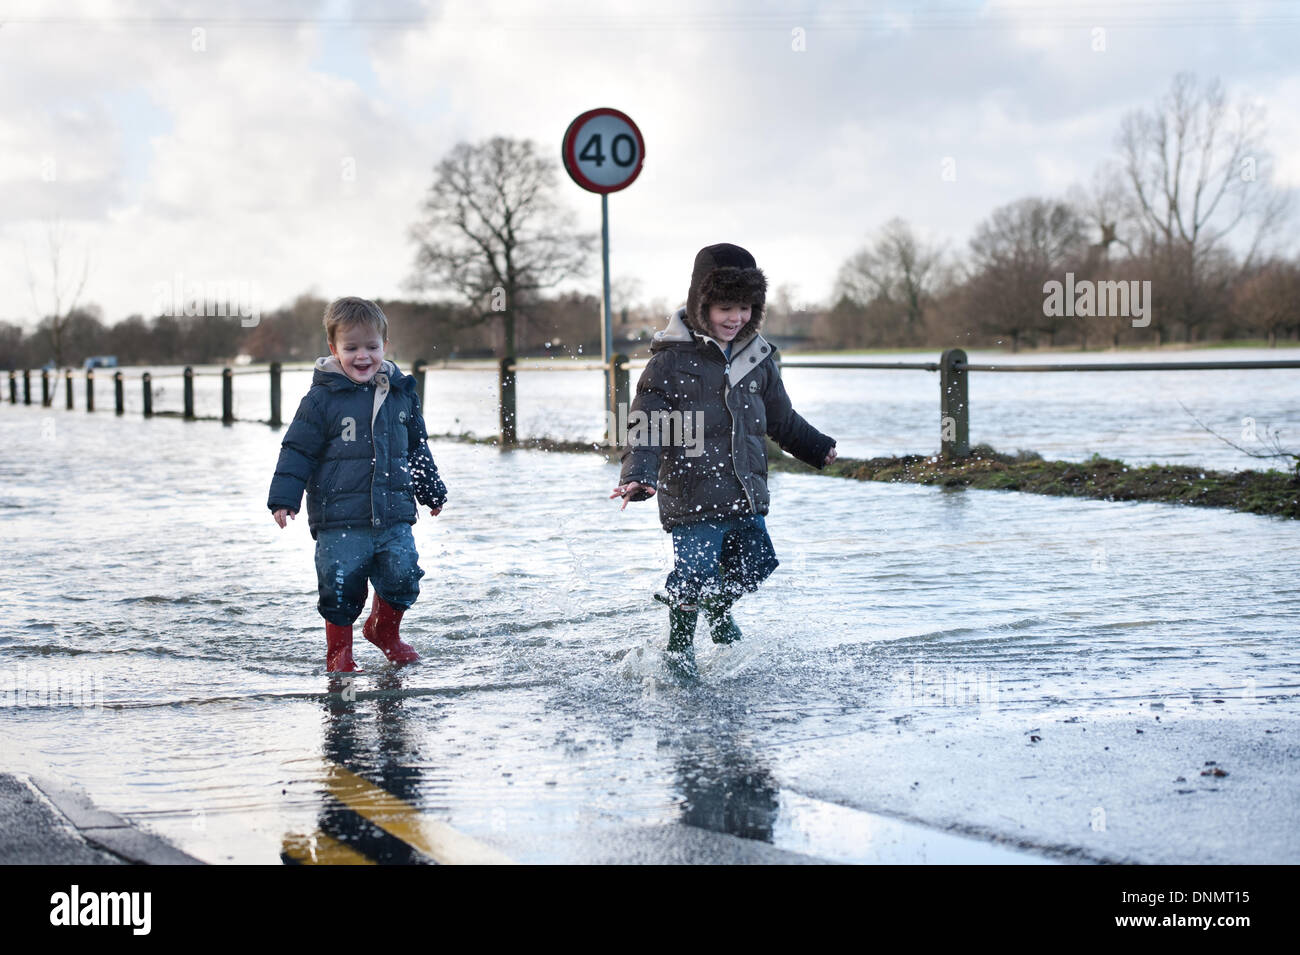 Yalding, Kent, UK. 2nd January 2014. The Environment Agency has issued a flood warning for Yalding Village in County of Kent the first one for 2014 on Thursday 2nd January. Two young children enjoying the water oblivious to the hardship this flooding is causing to local communities along Lee Road the entrance to the Village Credit:  Yon Marsh/Alamy Live News Stock Photo